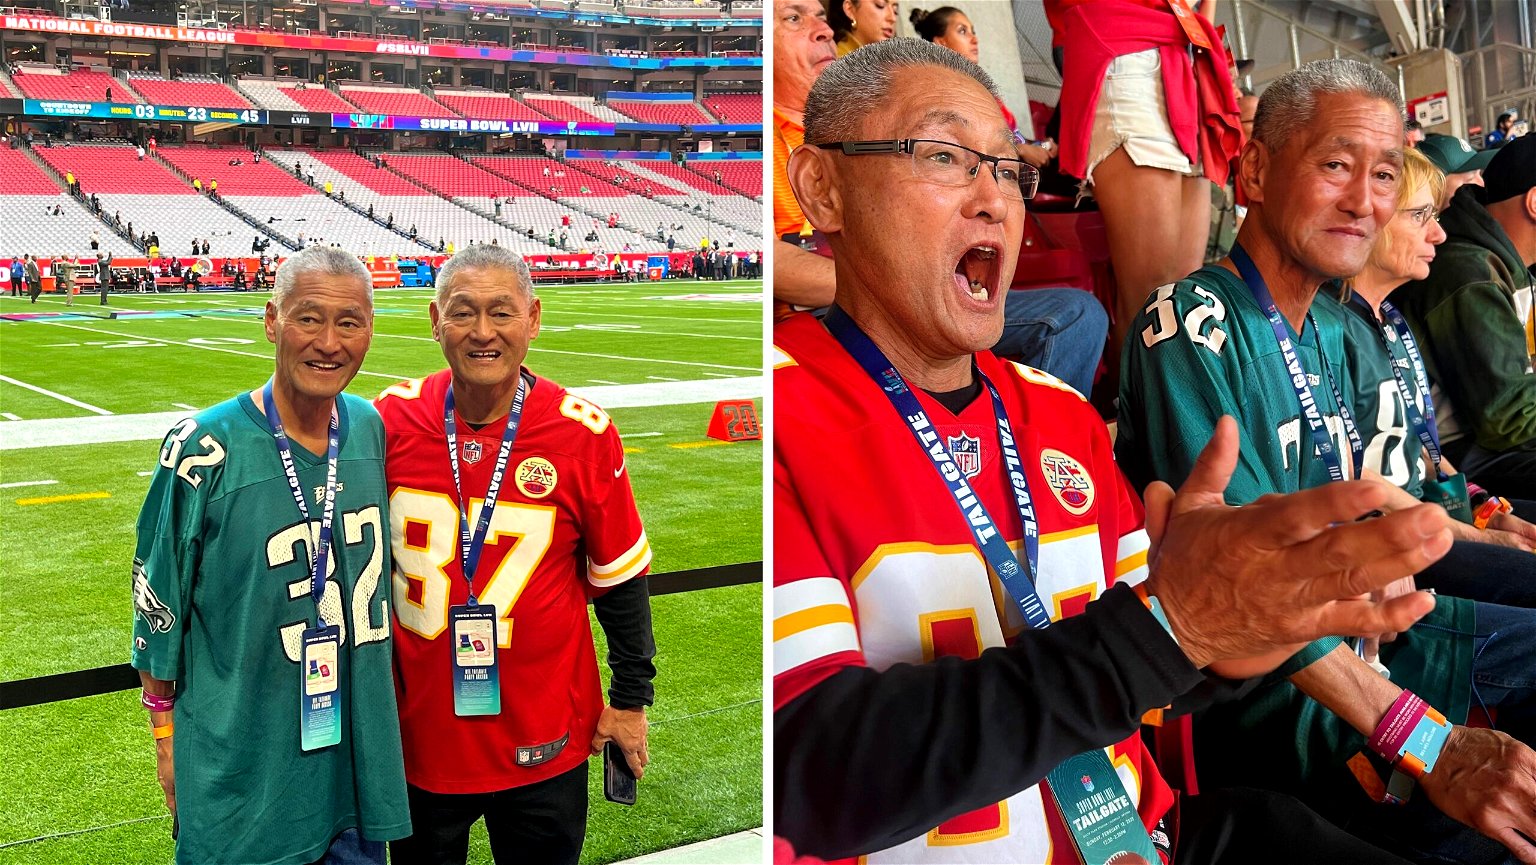 Reunited twins separated at birth attend first Super Bowl after NFL & NextShark surprise